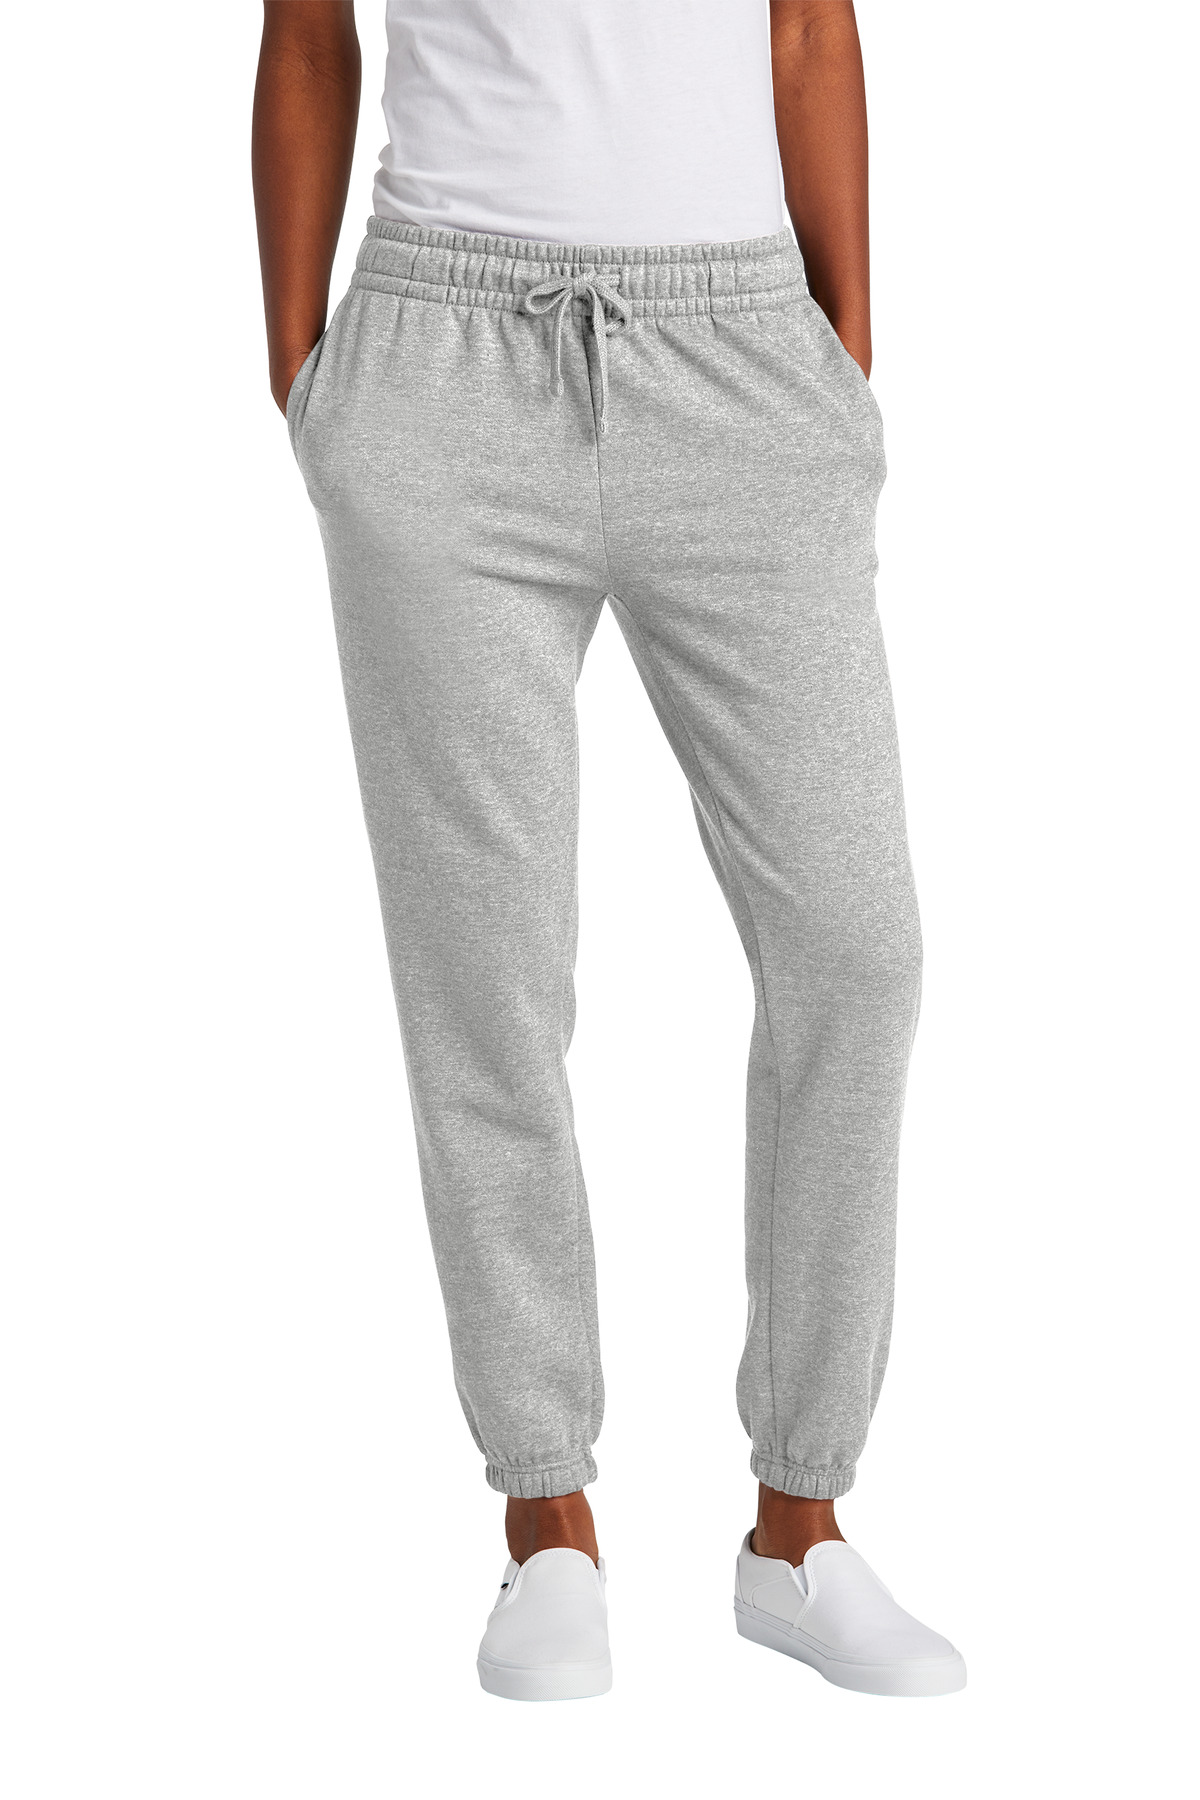 click to view Light Heather Grey